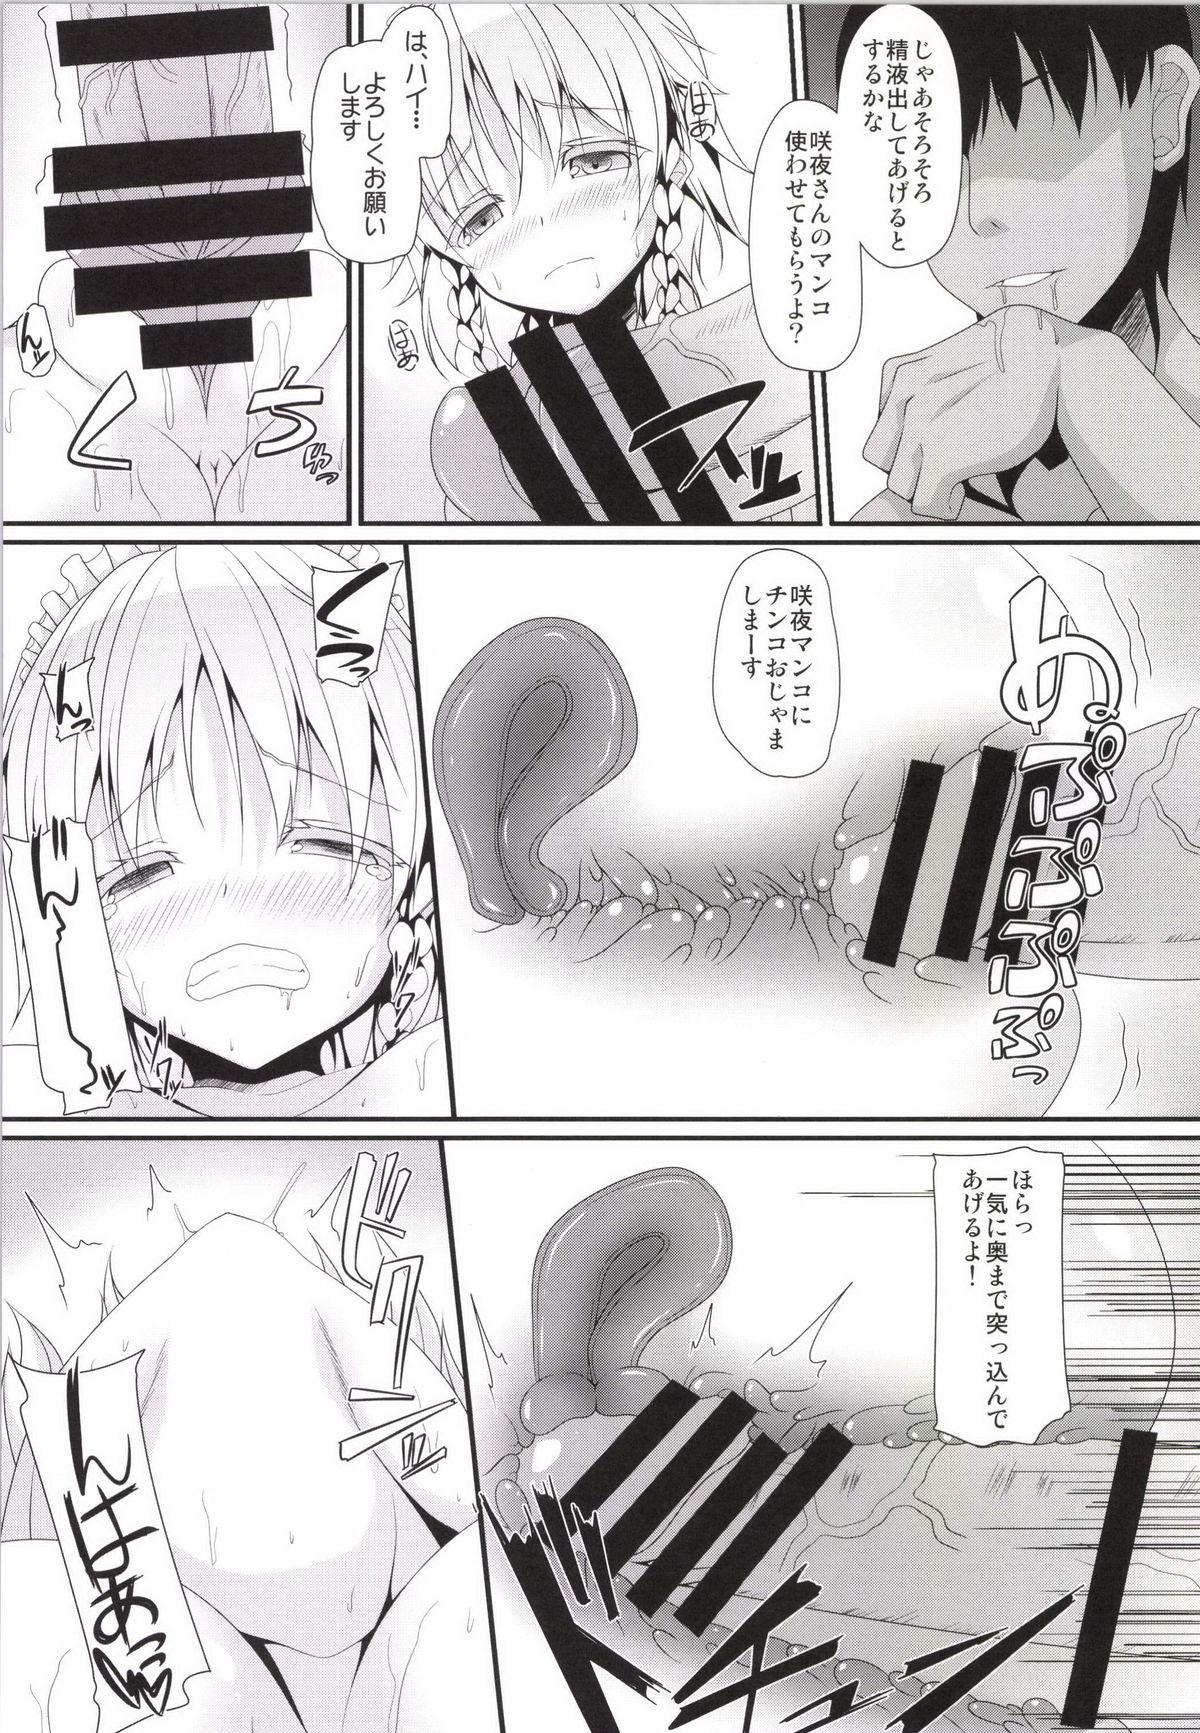 Bro LOVE MAID DO - Touhou project Facials - Page 8